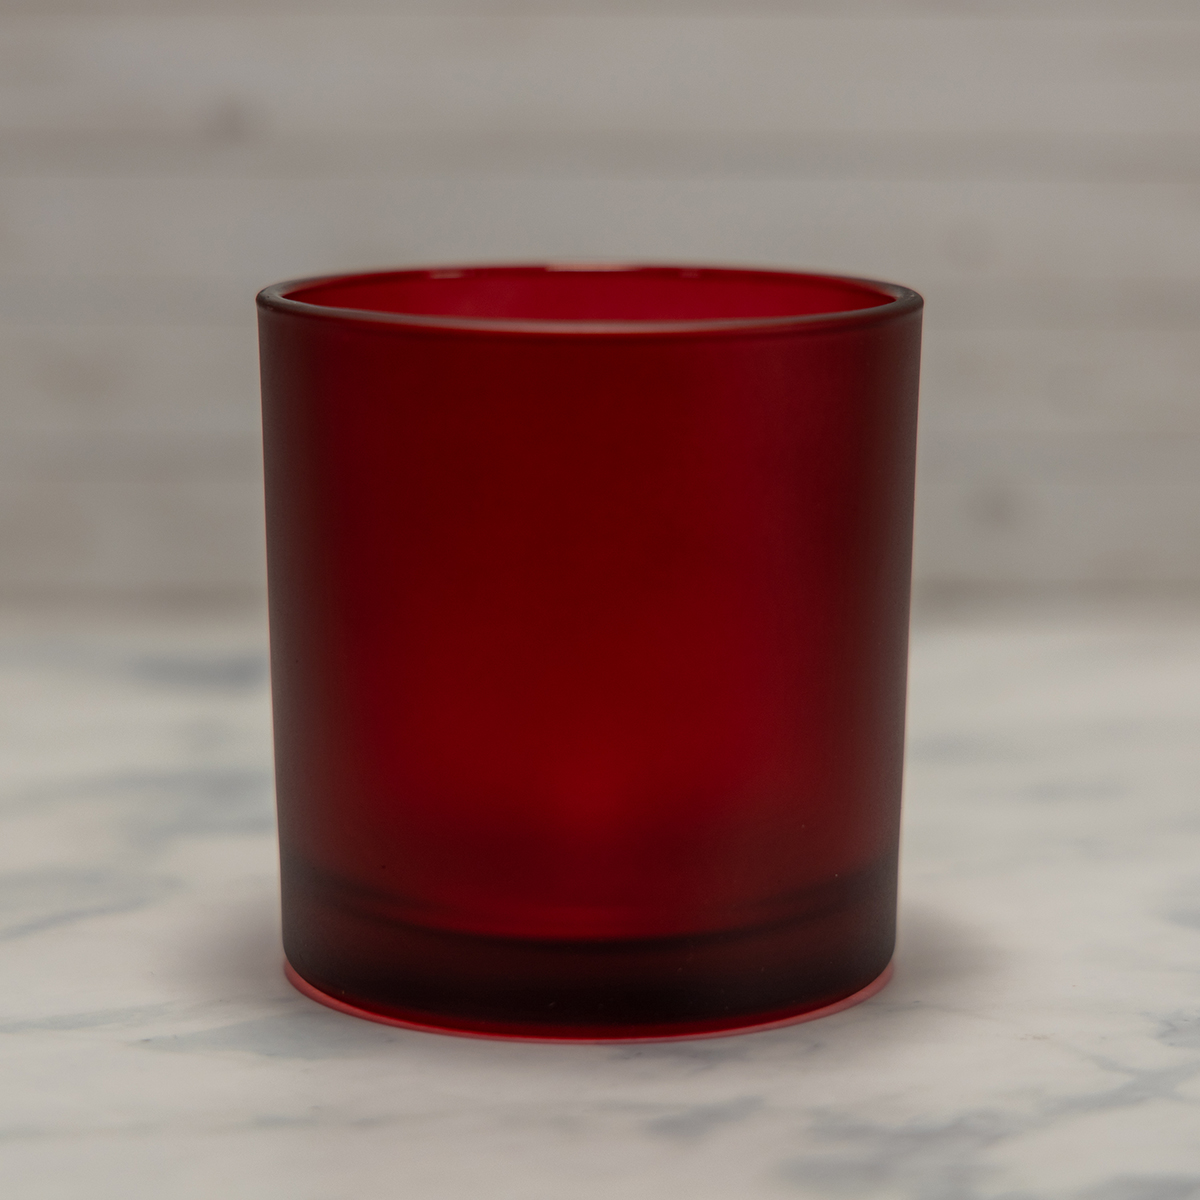 10 oz Monticiano Ruby candle jar